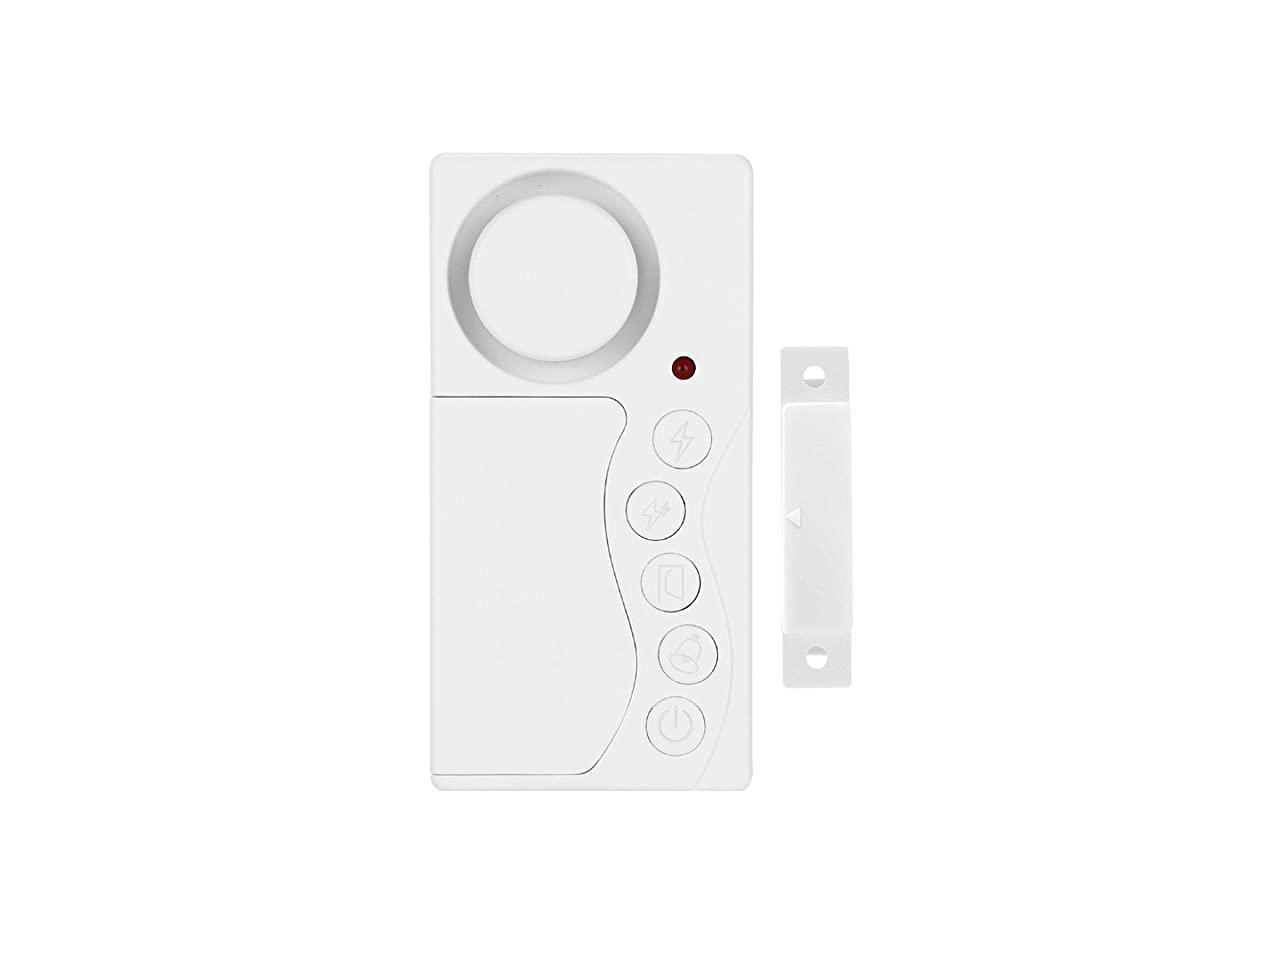 Freezer Door Alarm with 60 Second Delay, 2, 3, and 4 Minute Reminders,  Refrigerator and Fridge Door Alarm or Chime, Low/Loud 80 to 110 dB (White)